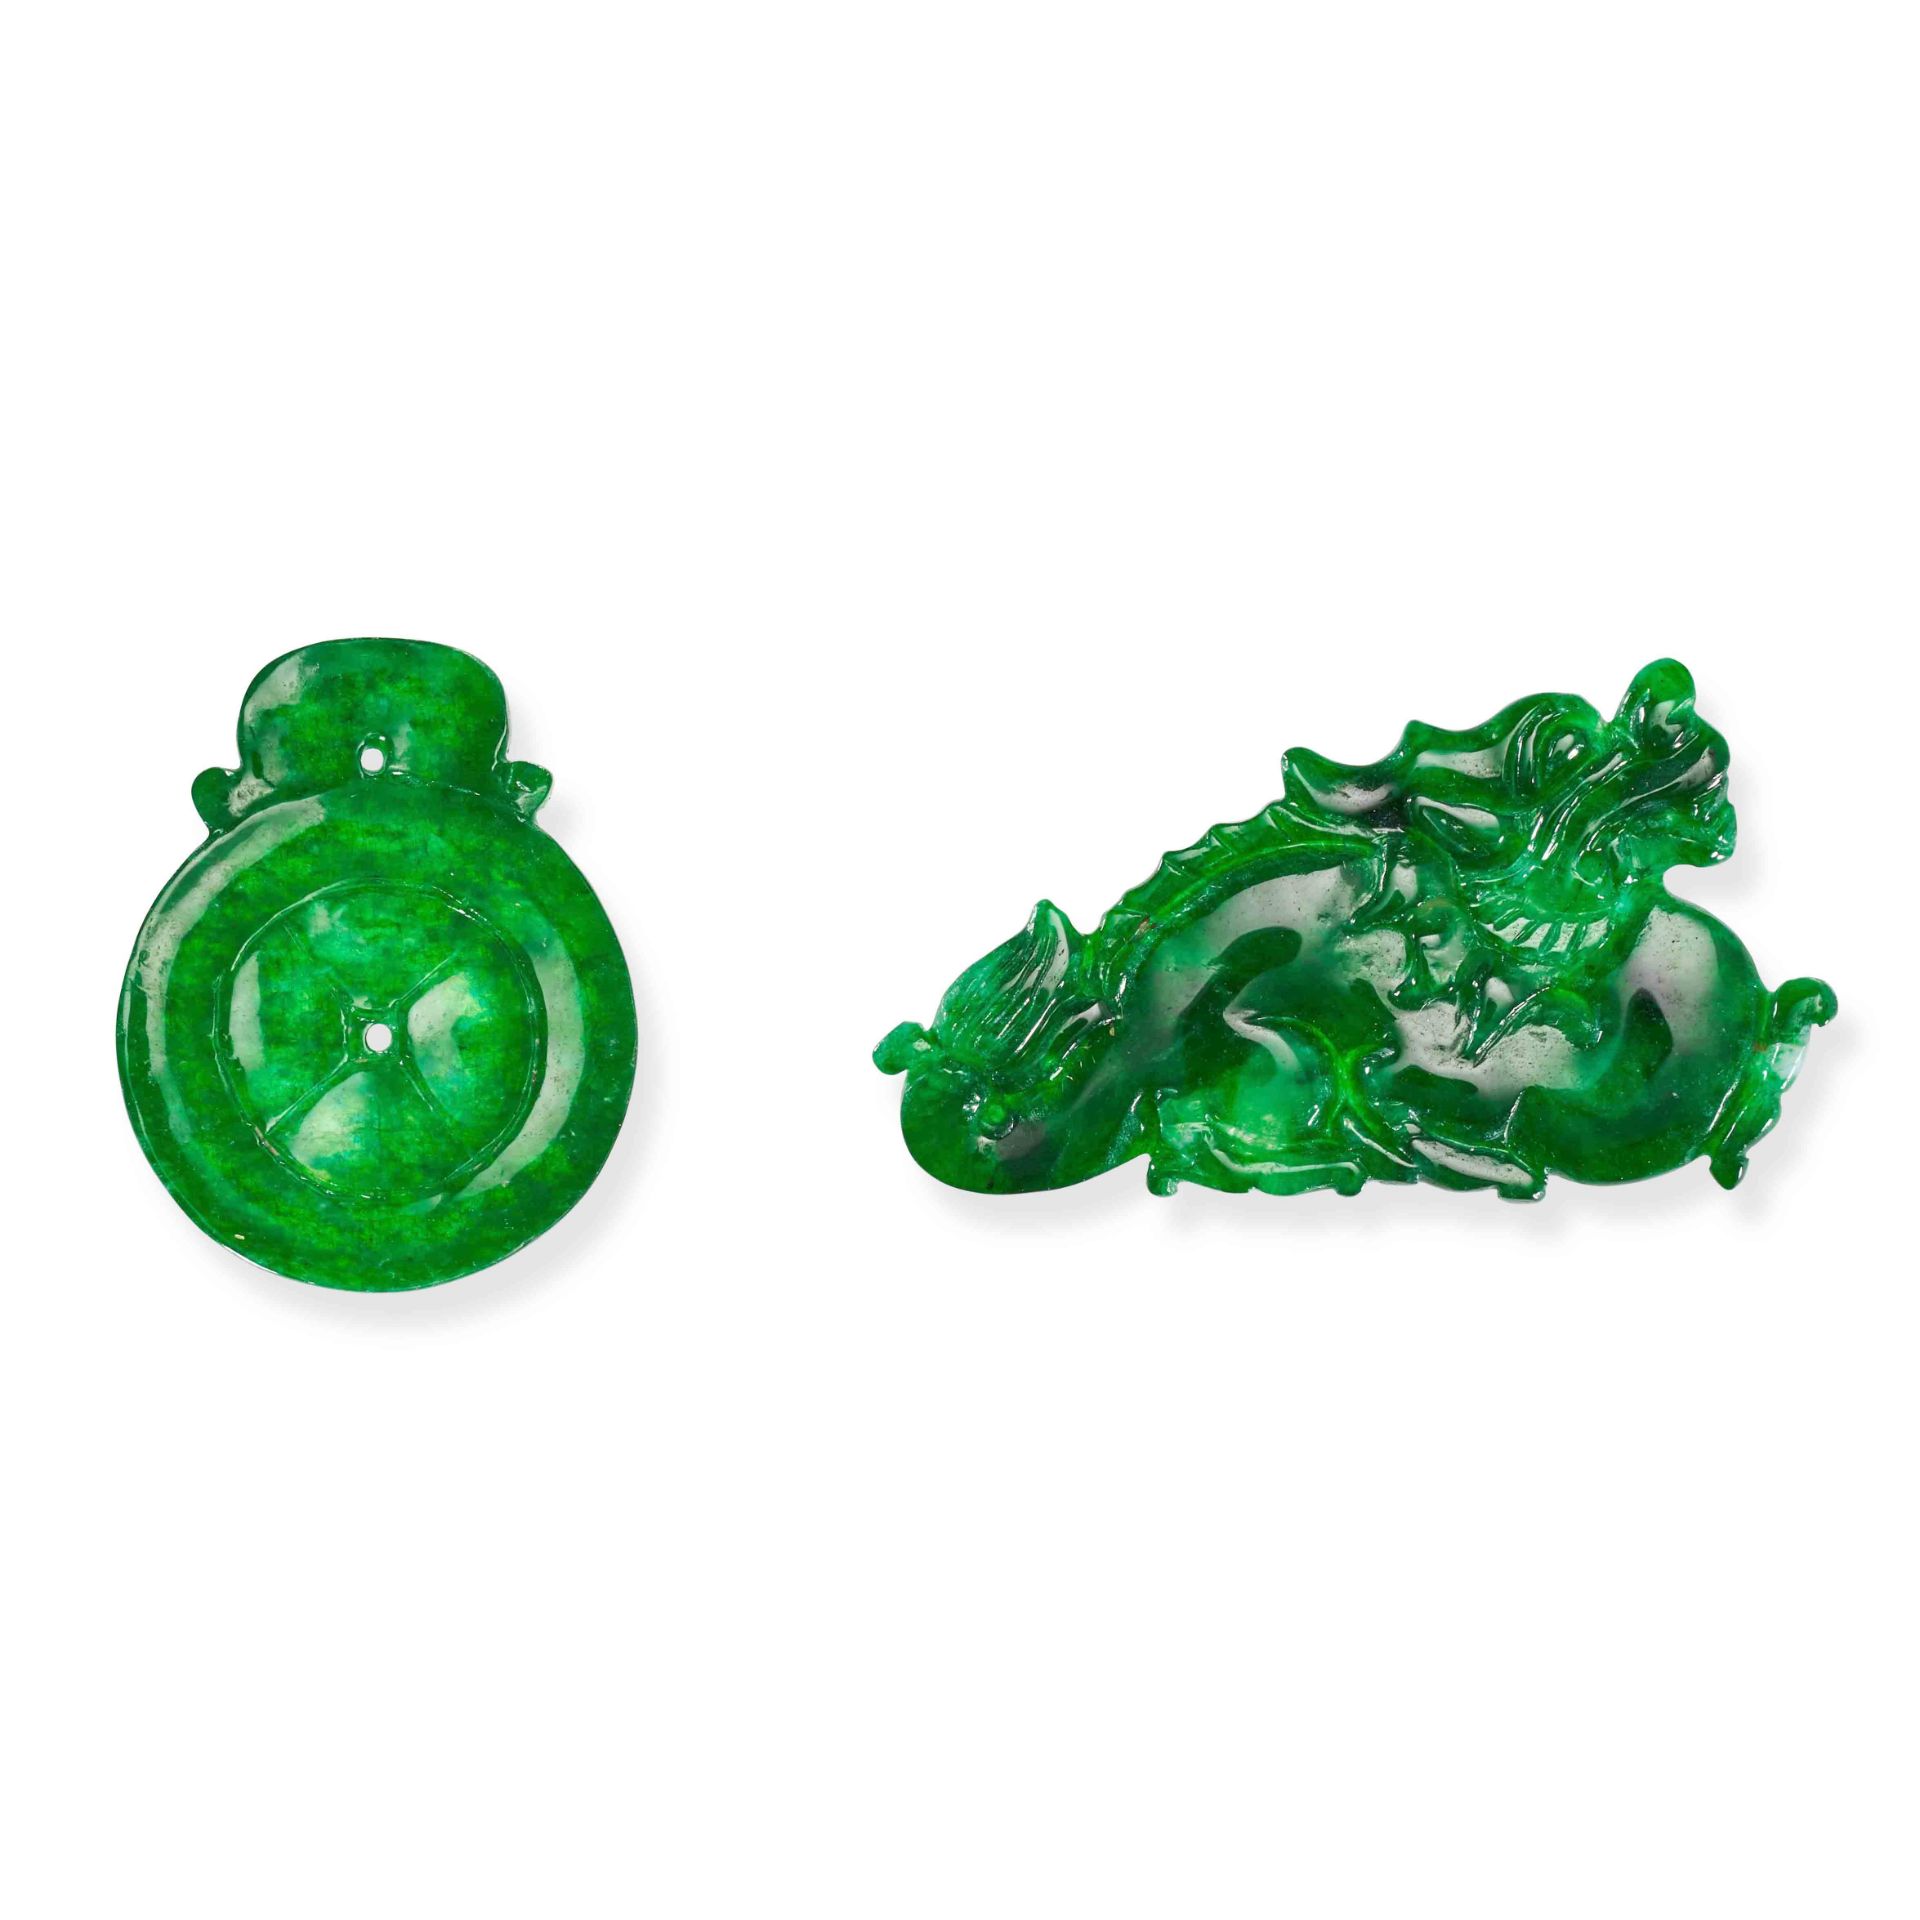 TWO UNMOUNTED JADEITE JADE PLAQUES carved to depict foliage and a disc, 2.4cm, 1.7cm, 1.2g.